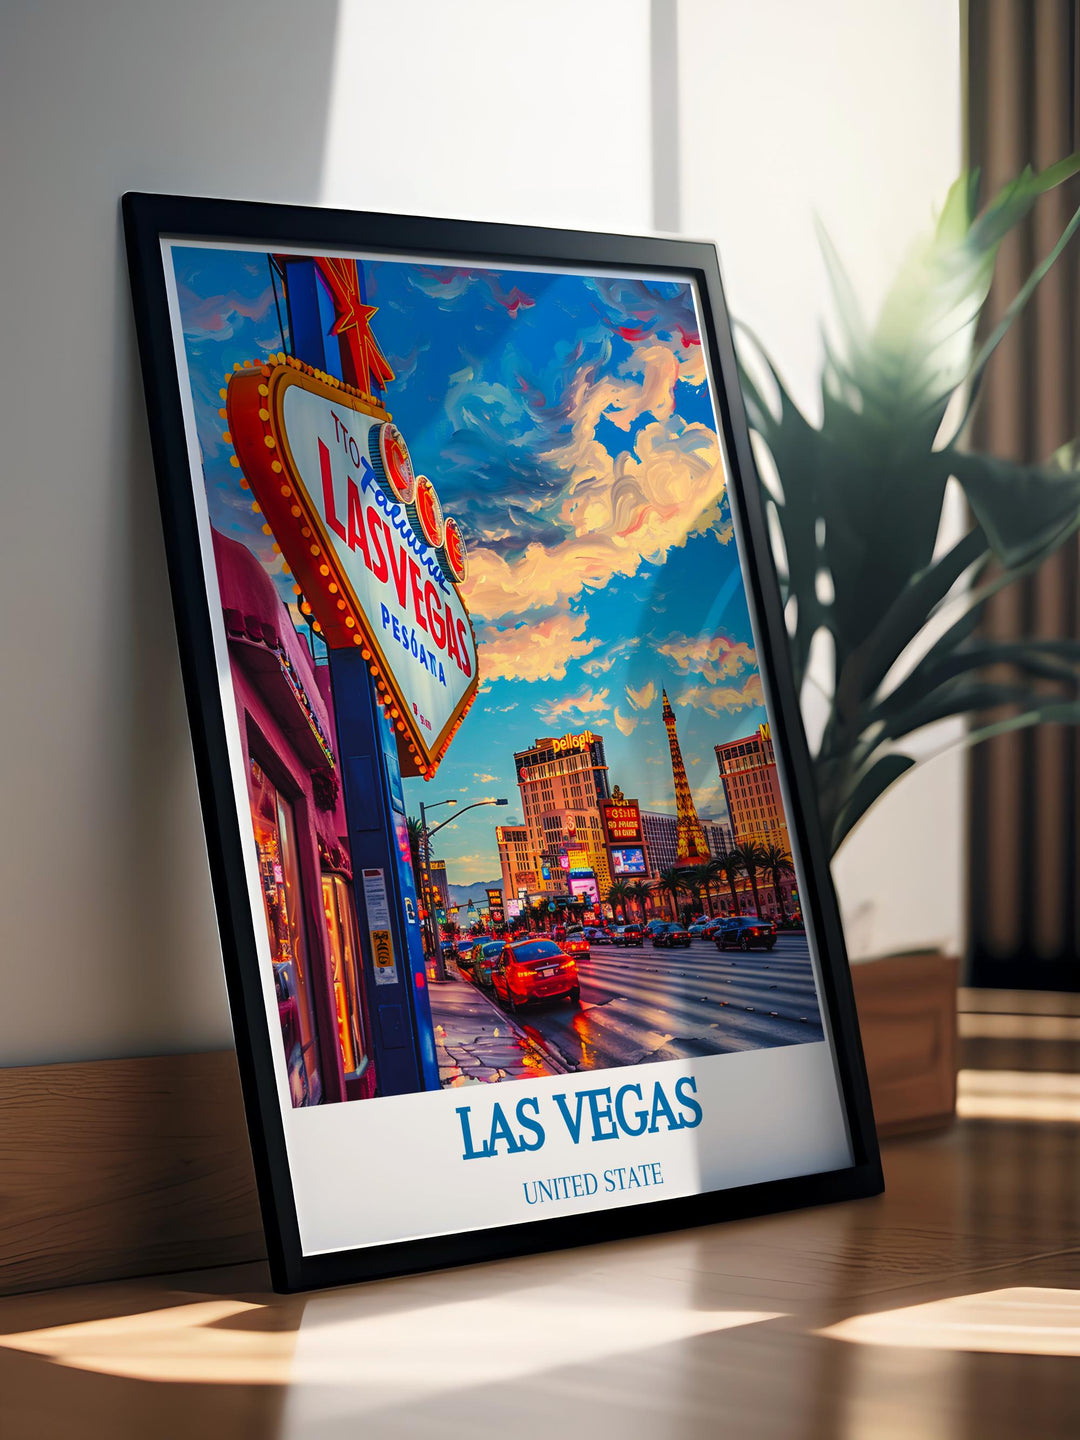 United States travel poster featuring classic Las Vegas attractions, suitable for decorating a travel themed room or office.